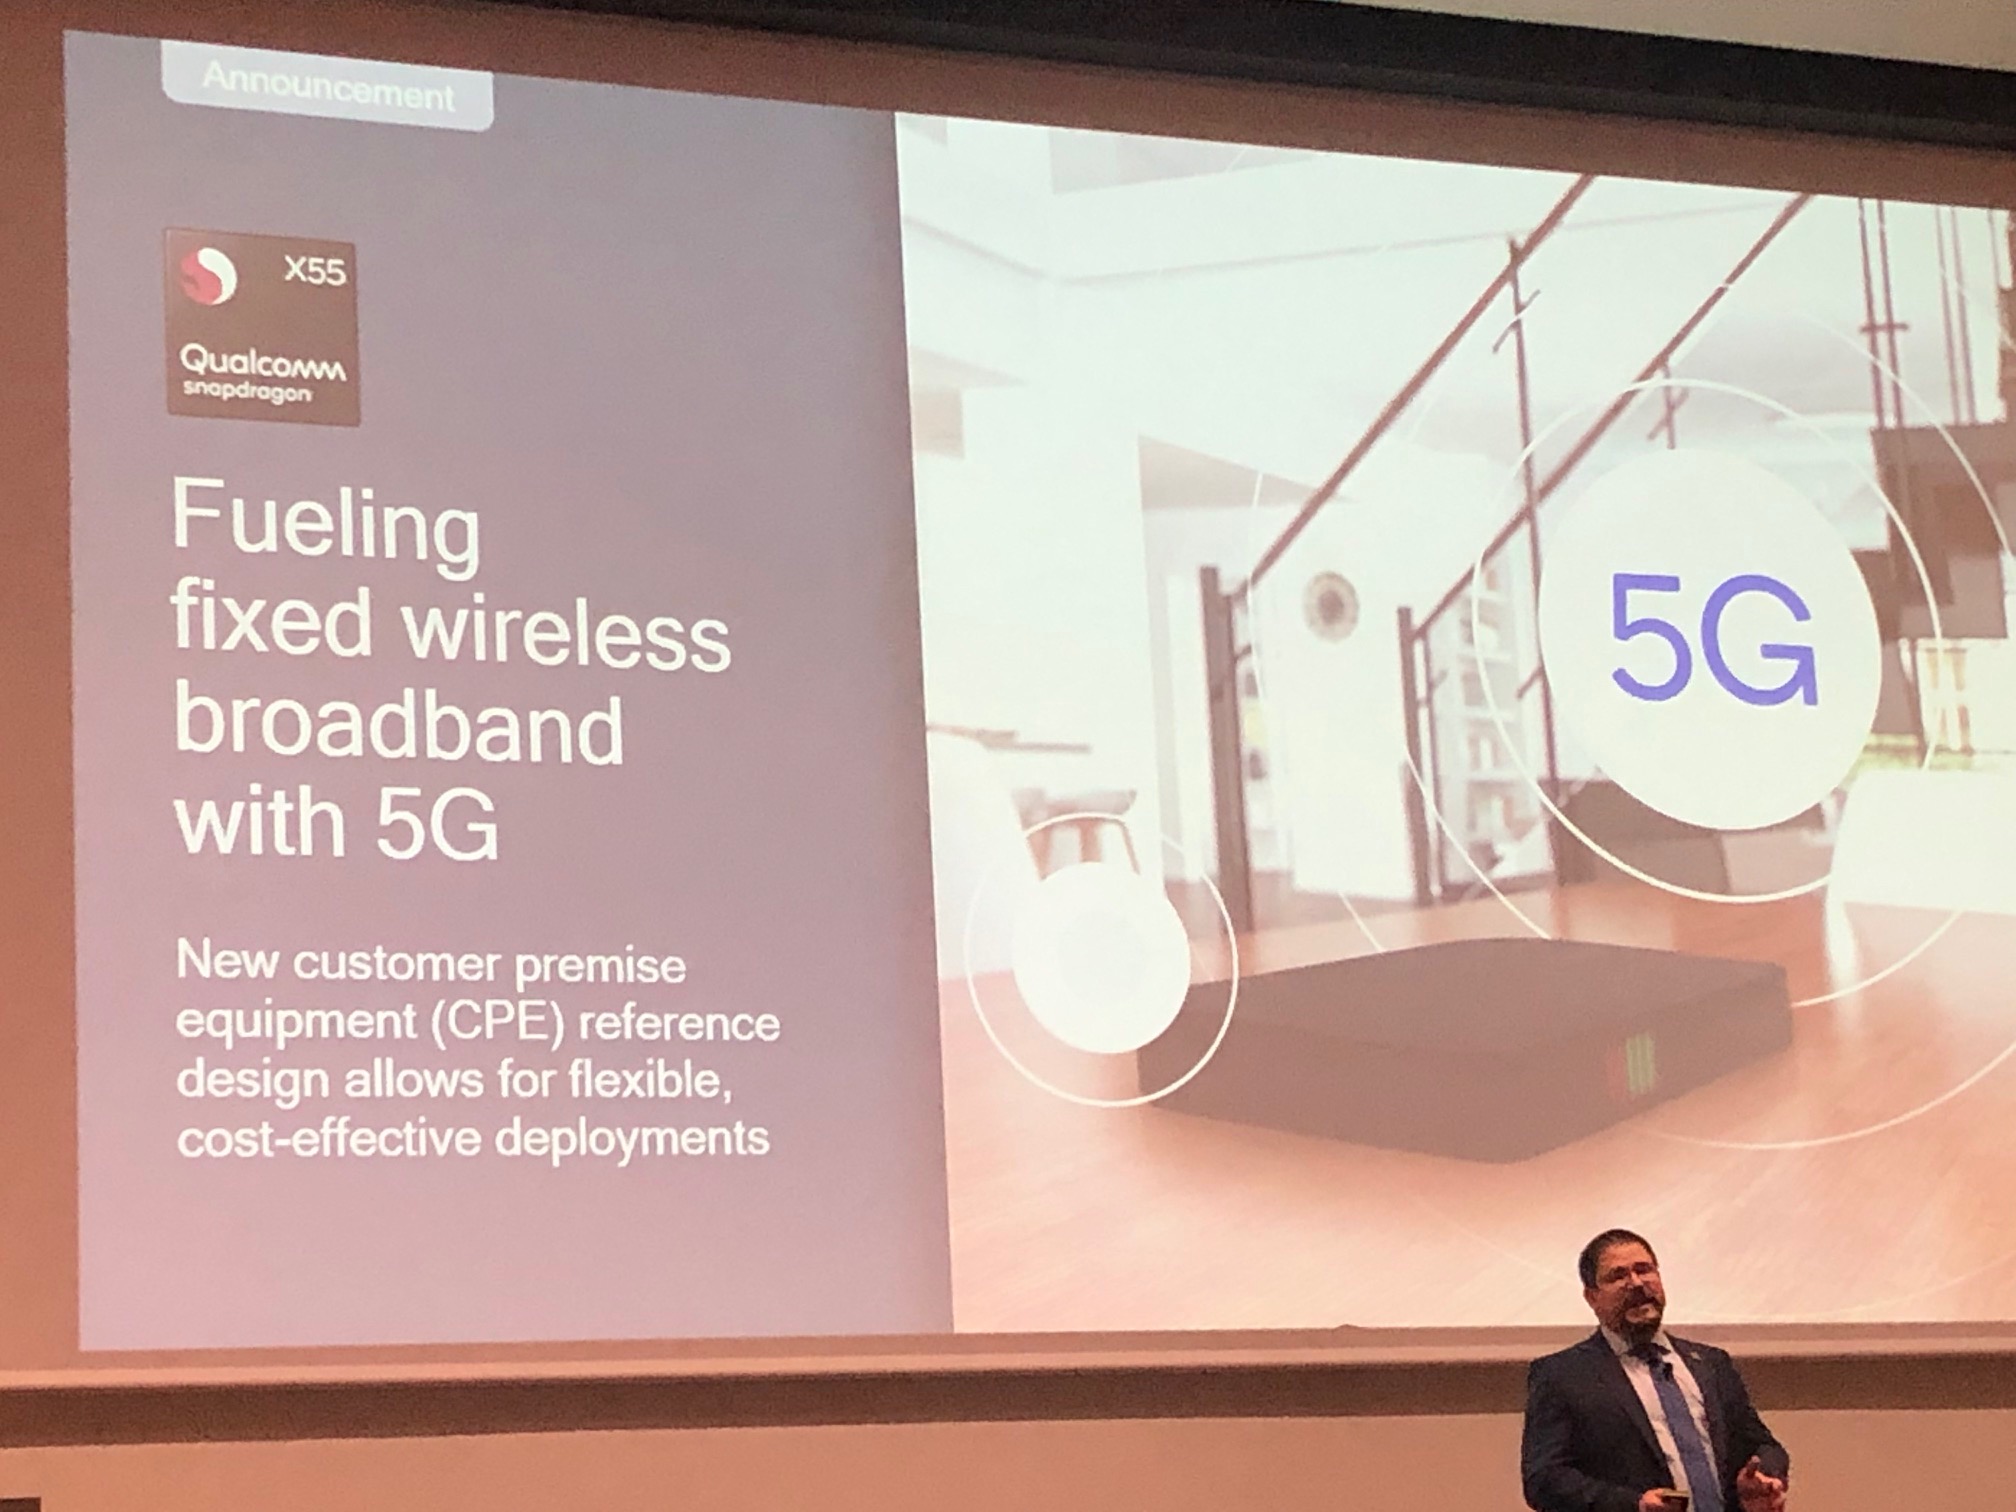 Qualcomm Debuts CPE Reference Design for Fixed Wireless 5G Broadband